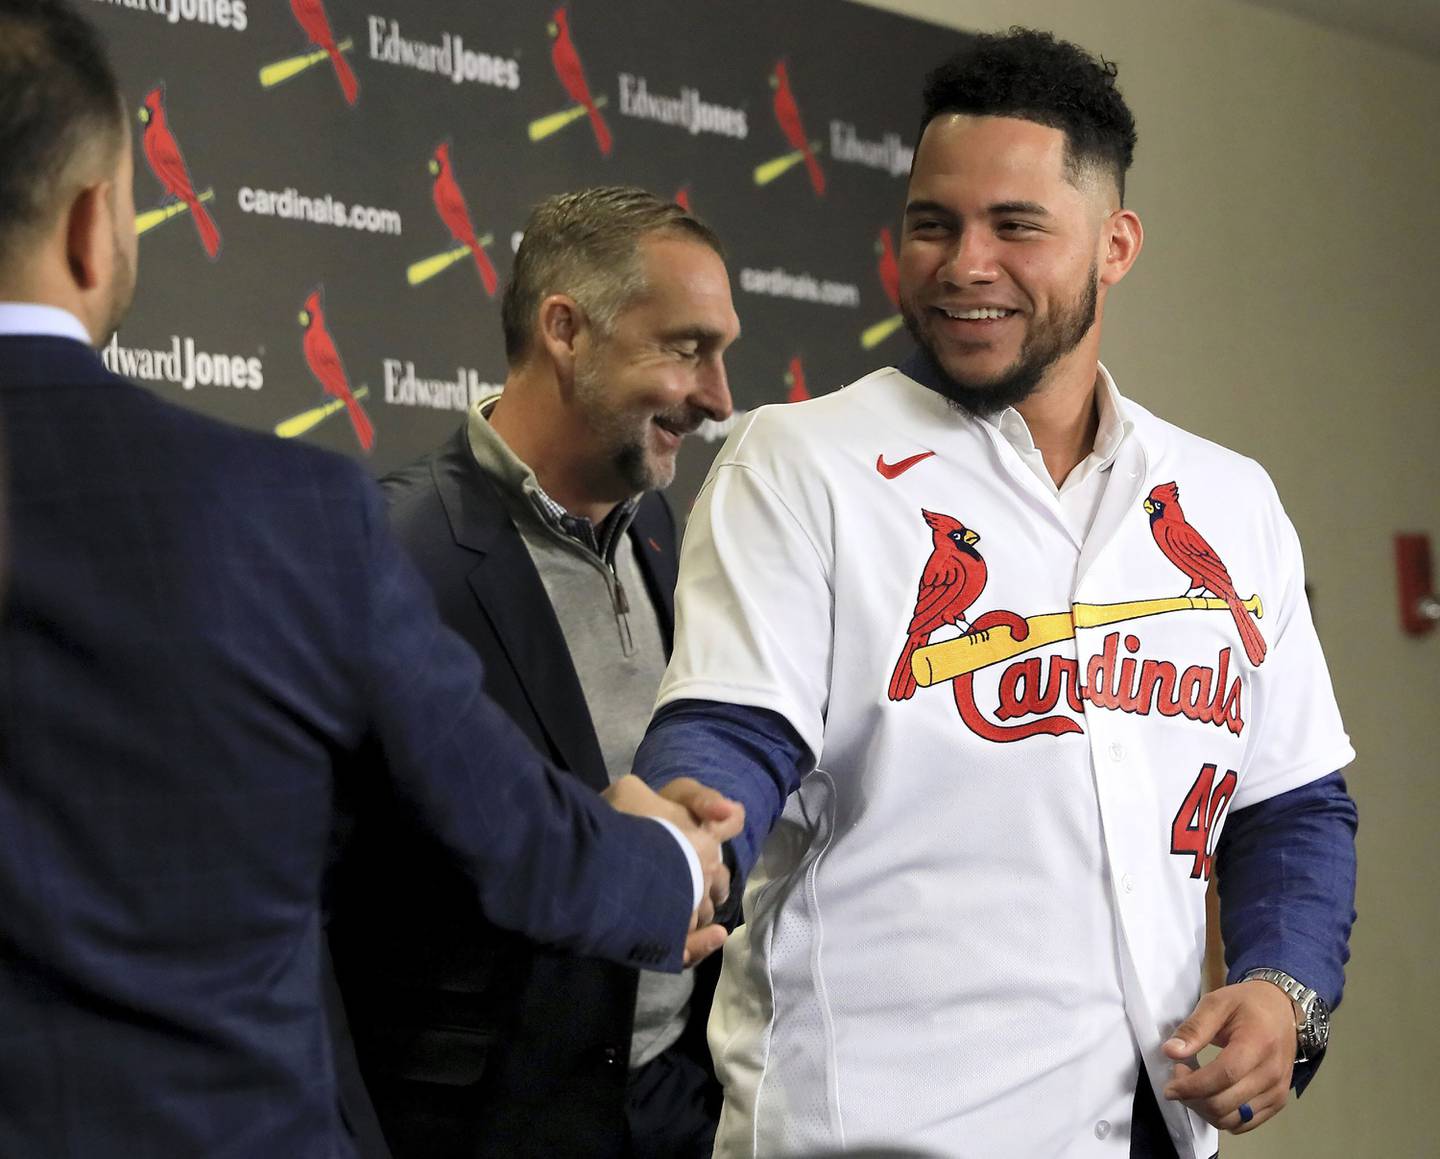 New Cardinals catcher Willson Contreras, right, shakes hands with manager Oliver Marmol after an introductory news conference on Dec. 9 at Busch Stadium in St. Louis. Contreras, 30, played the first seven seasons of his career before signing with the Cardinals as a free agent. 